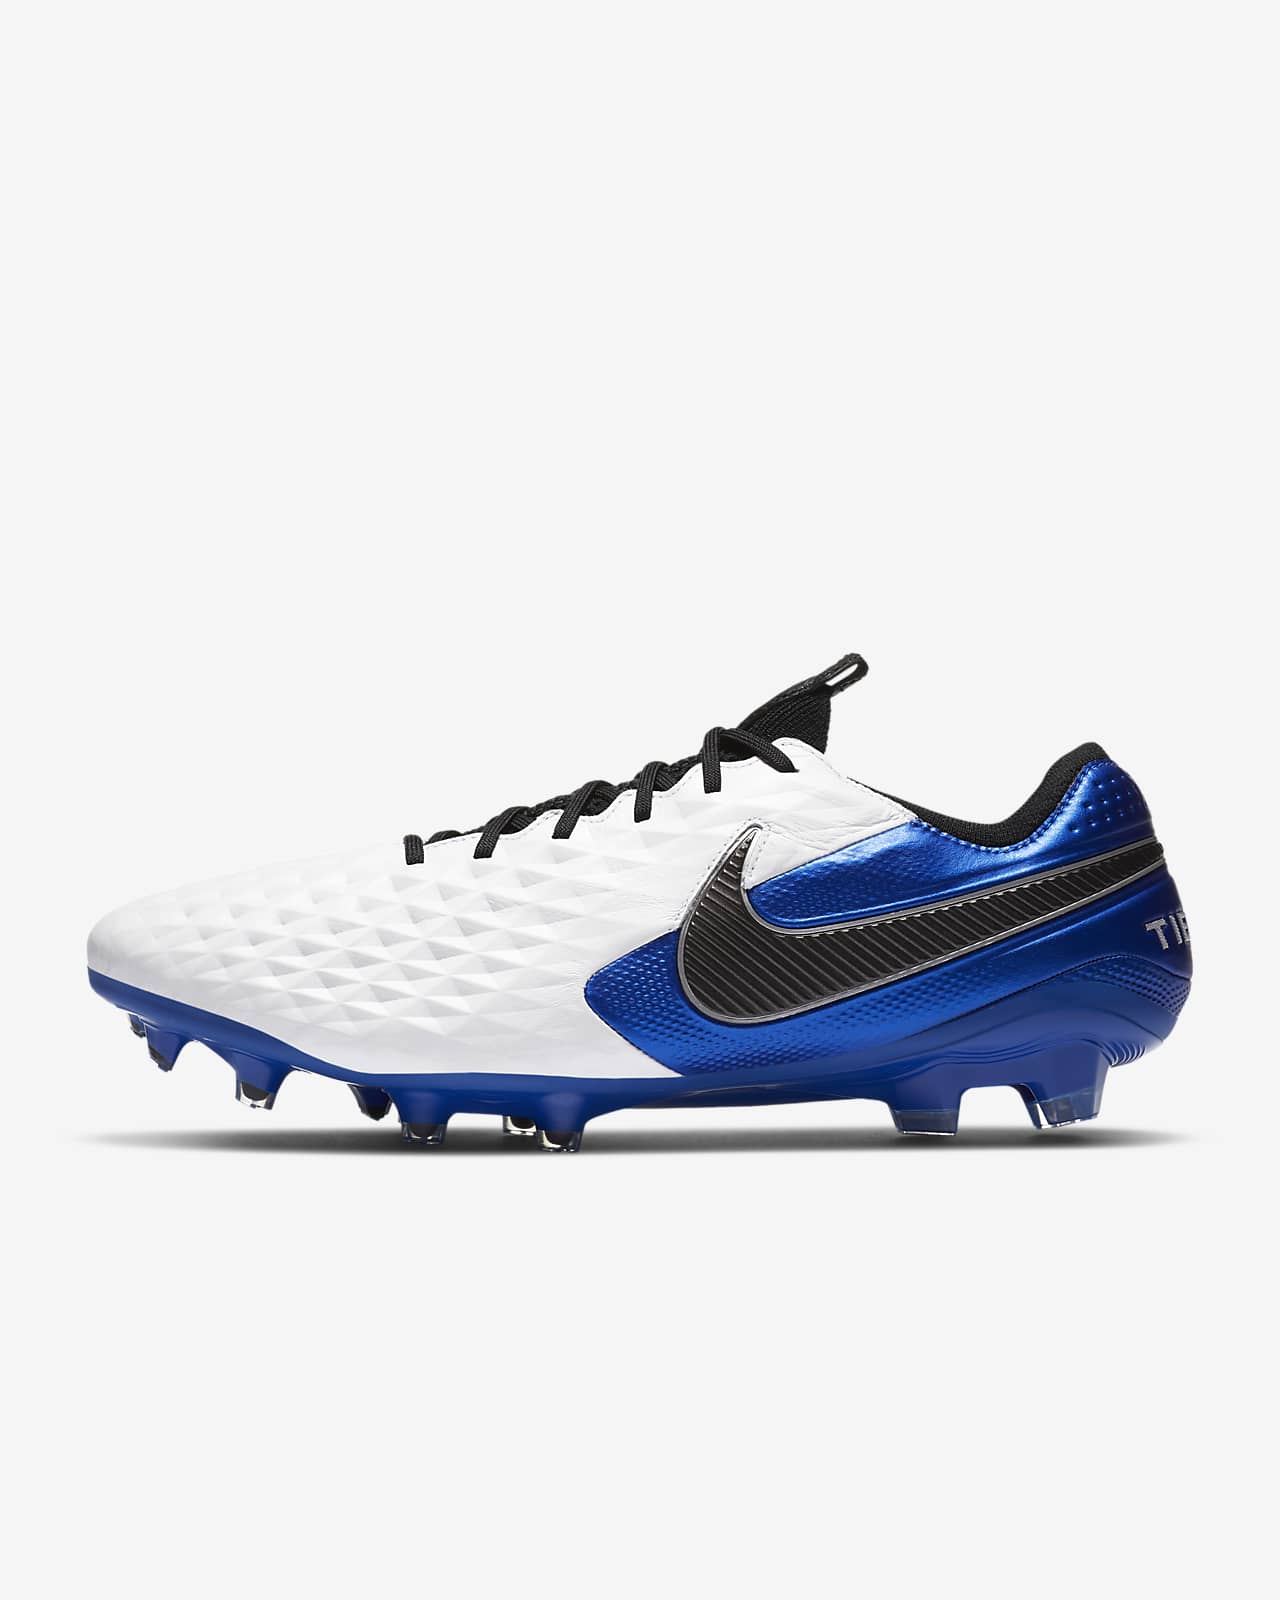 Mail completely Round down Nike Tiempo Football Boots Norway, SAVE 41% - lutheranems.com